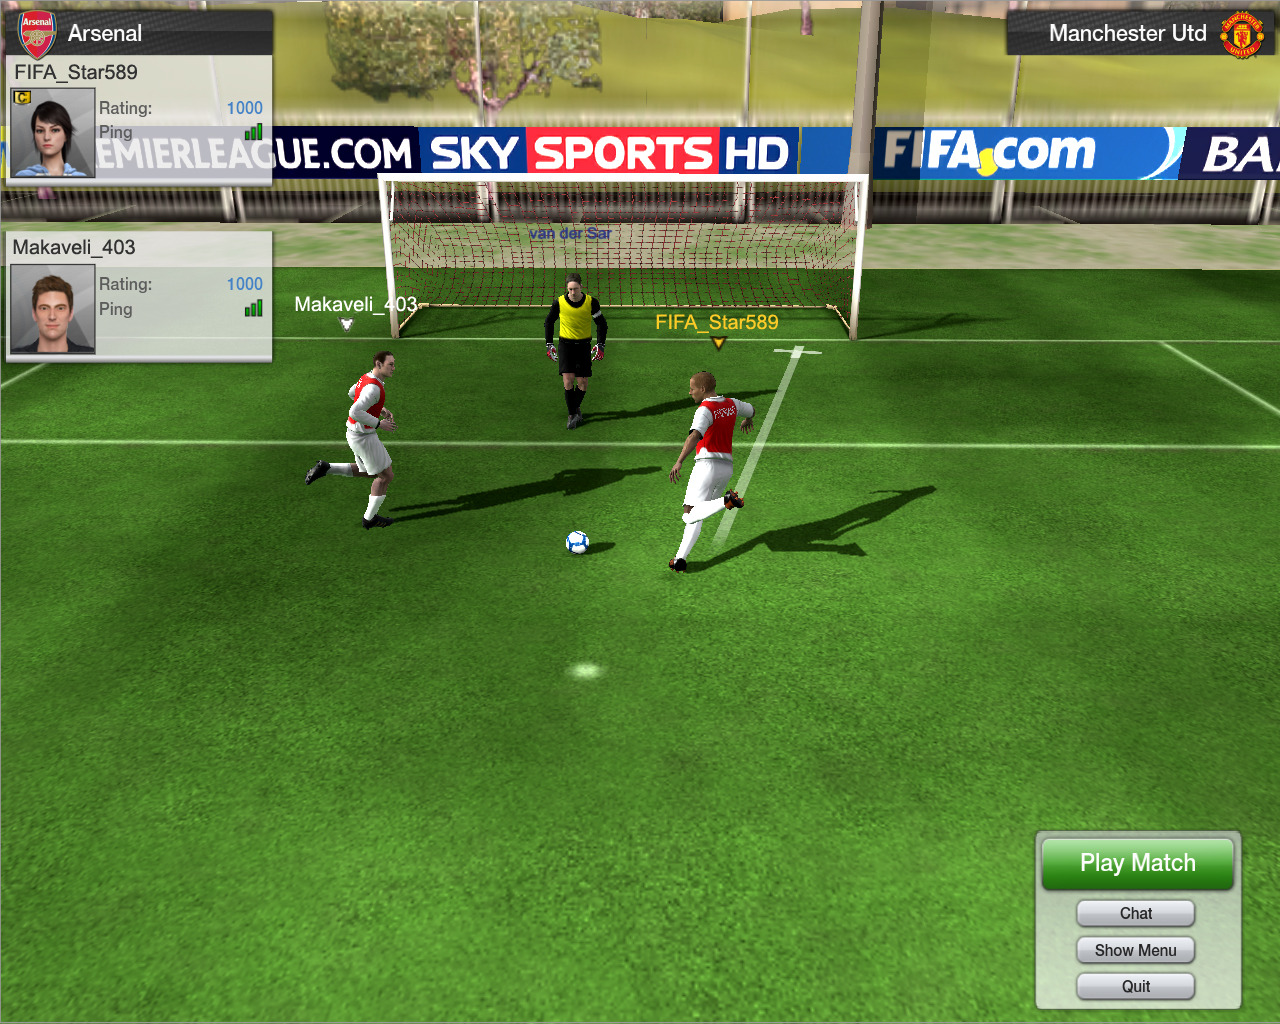 Fifa online 4 download english